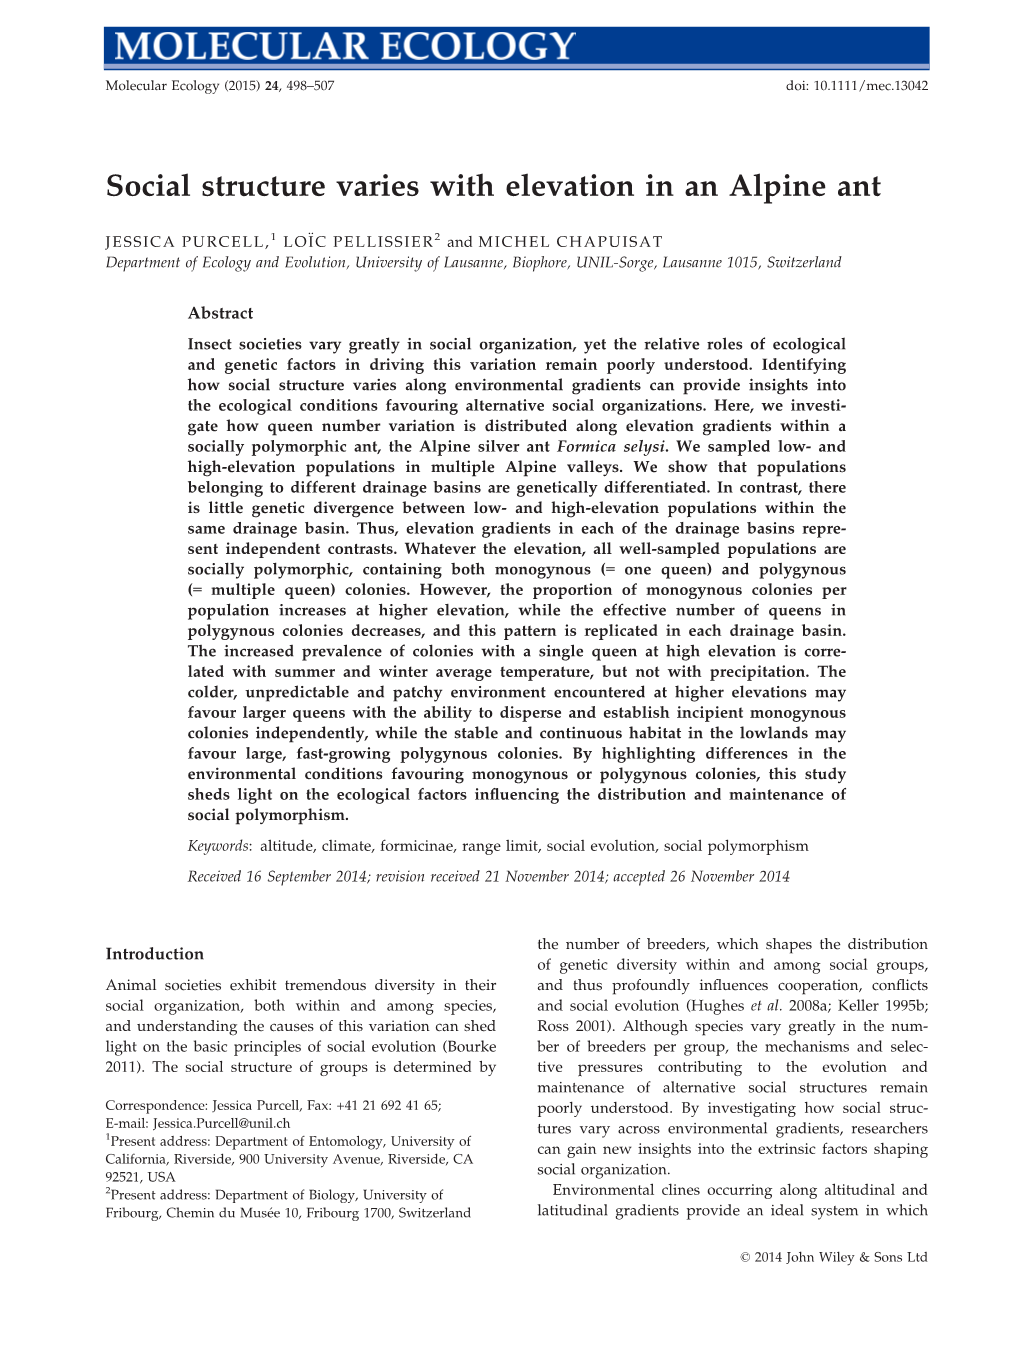 Social Structure Varies with Elevation in an Alpine Ant